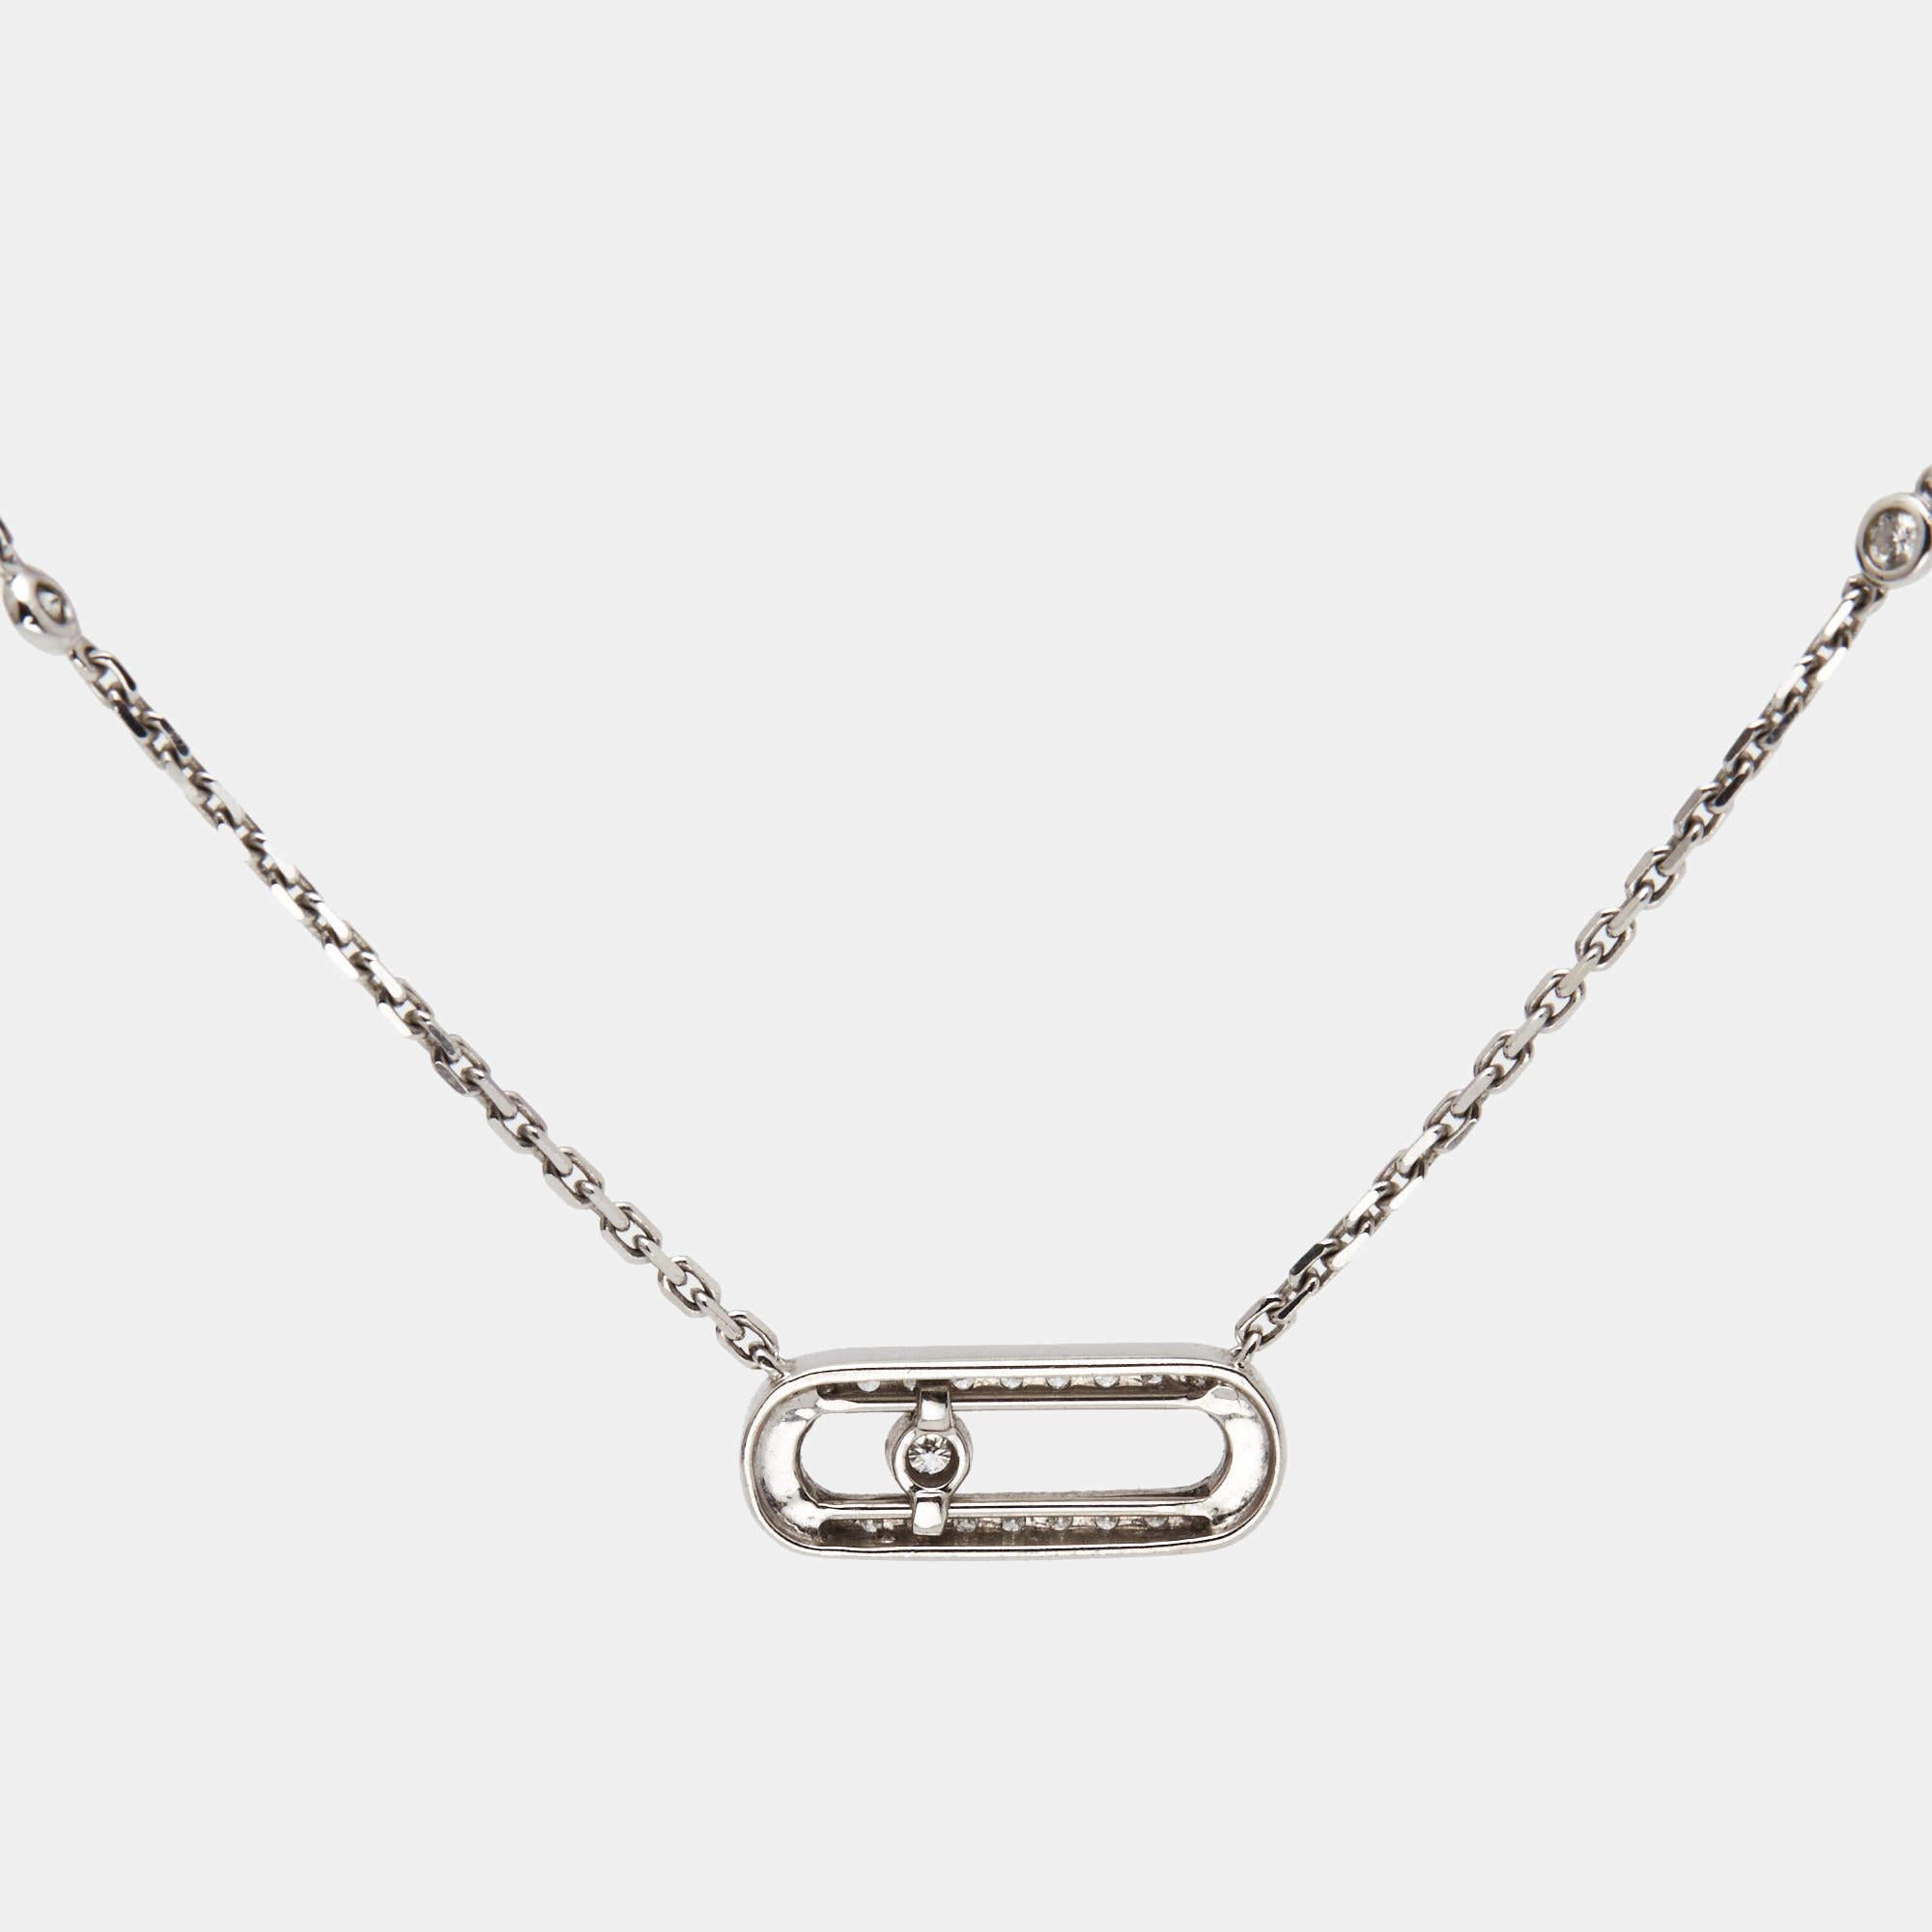 The fine workmanship, use of precious metals, and unique appeal make this Messika Move Uno Pave necklace for women a fabulous purchase. It's a worthy investment.

